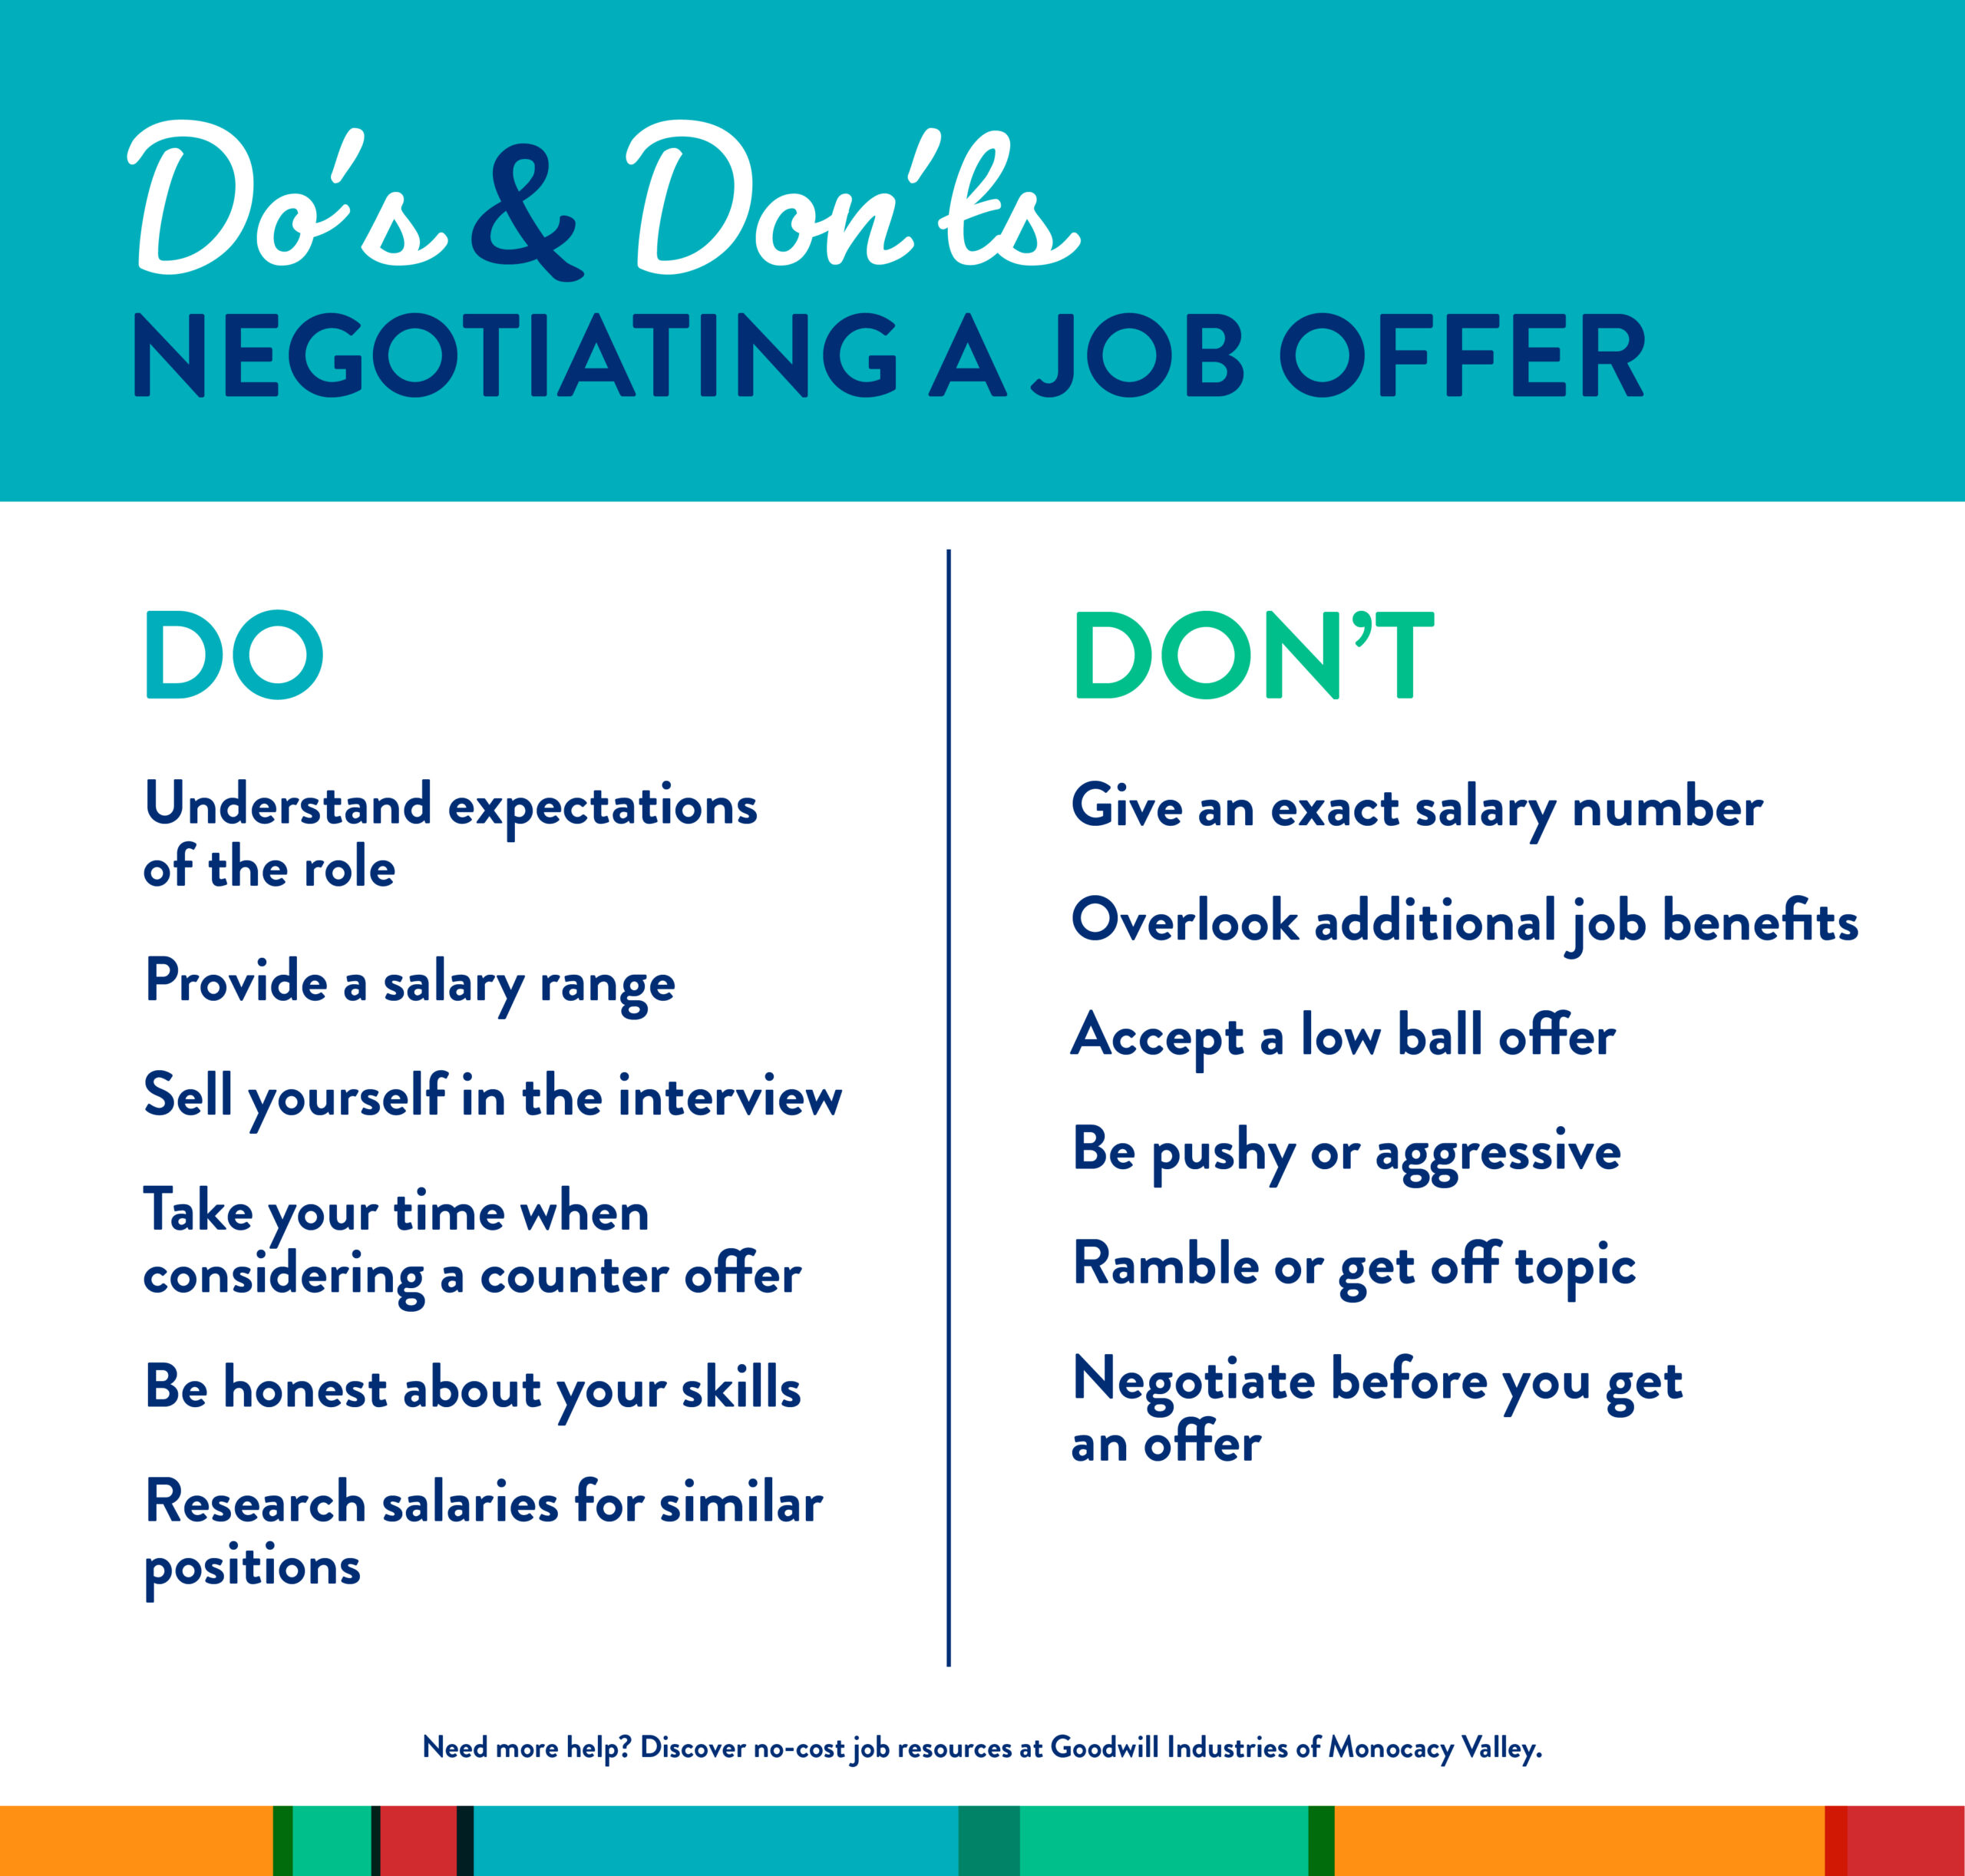 do's and don'ts of negotiating a job offer infographic